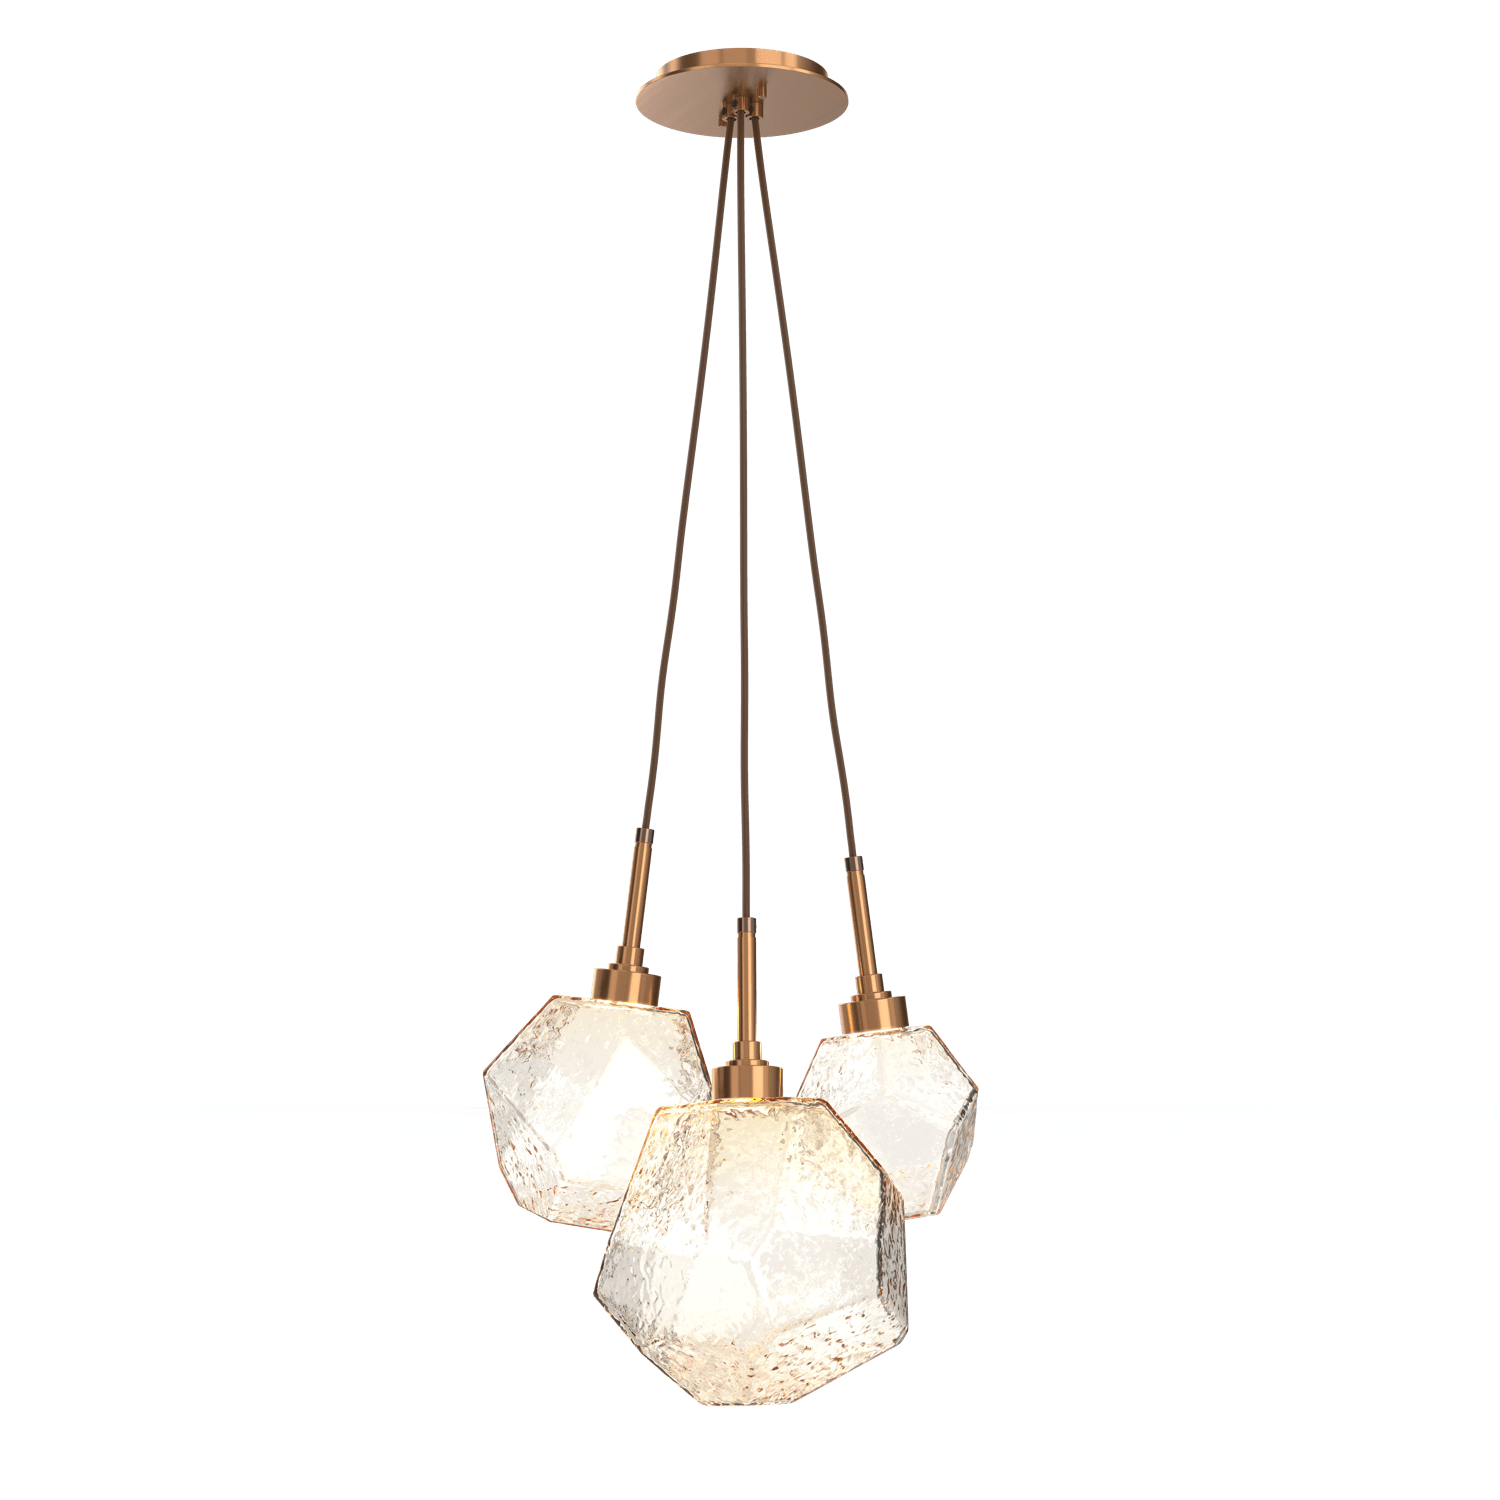 CHB0039-0E-RB-A-Hammerton-Studio-Gem-3-light-cluster-pendant-light-with-oil-rubbed-bronze-finish-and-amber-blown-glass-shades-and-LED-lamping